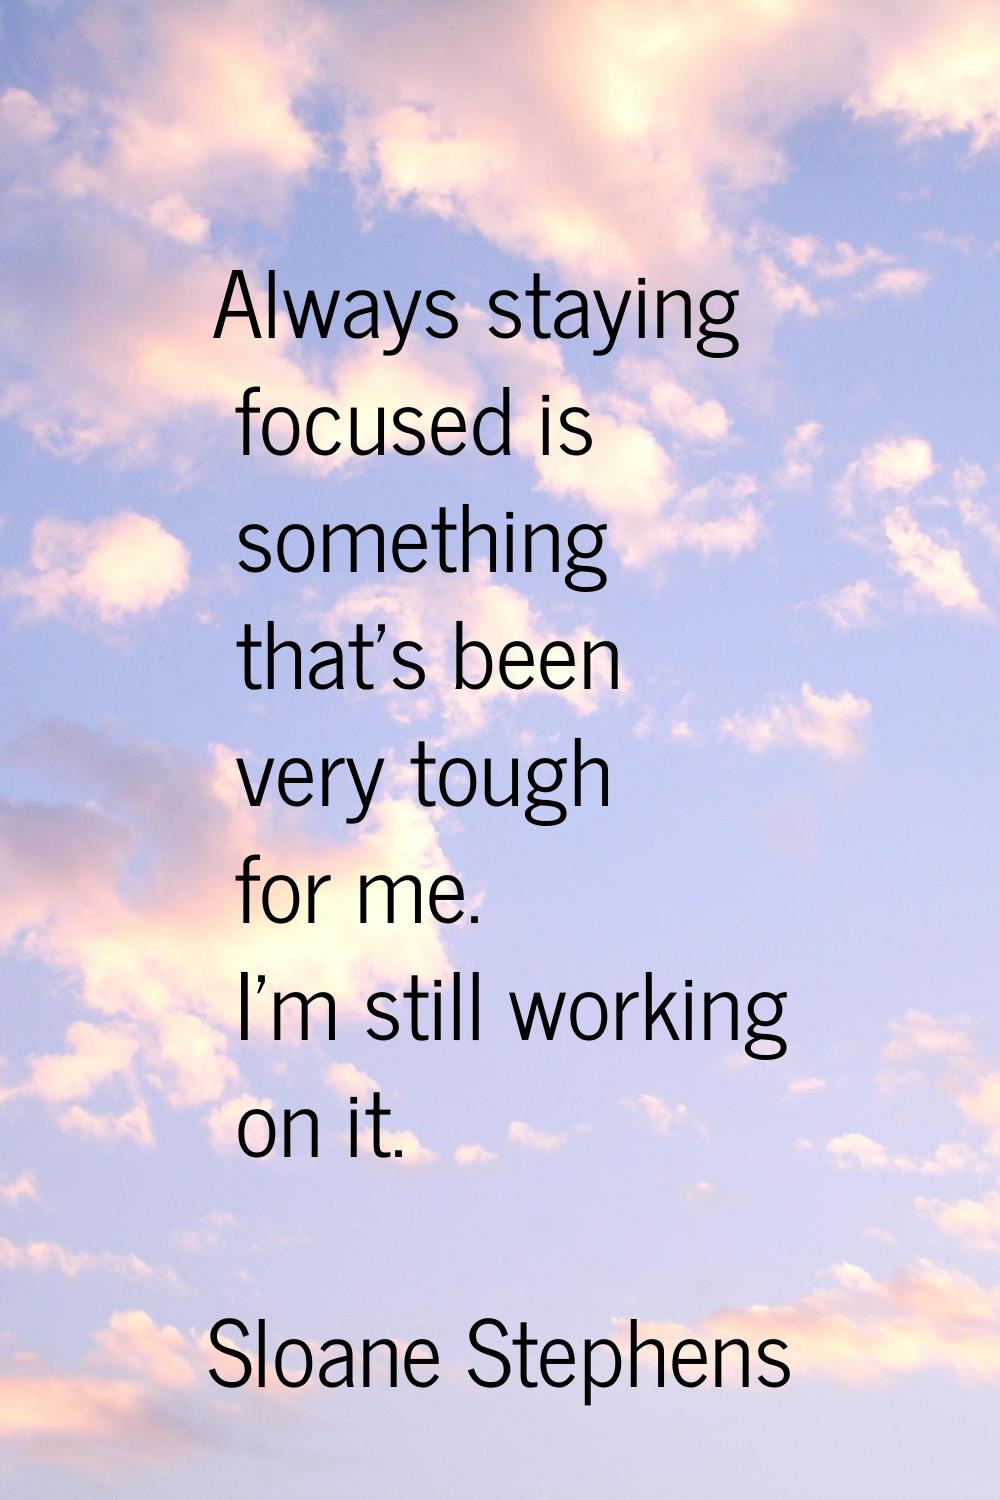 Always staying focused is something that's been very tough for me. I'm still working on it.